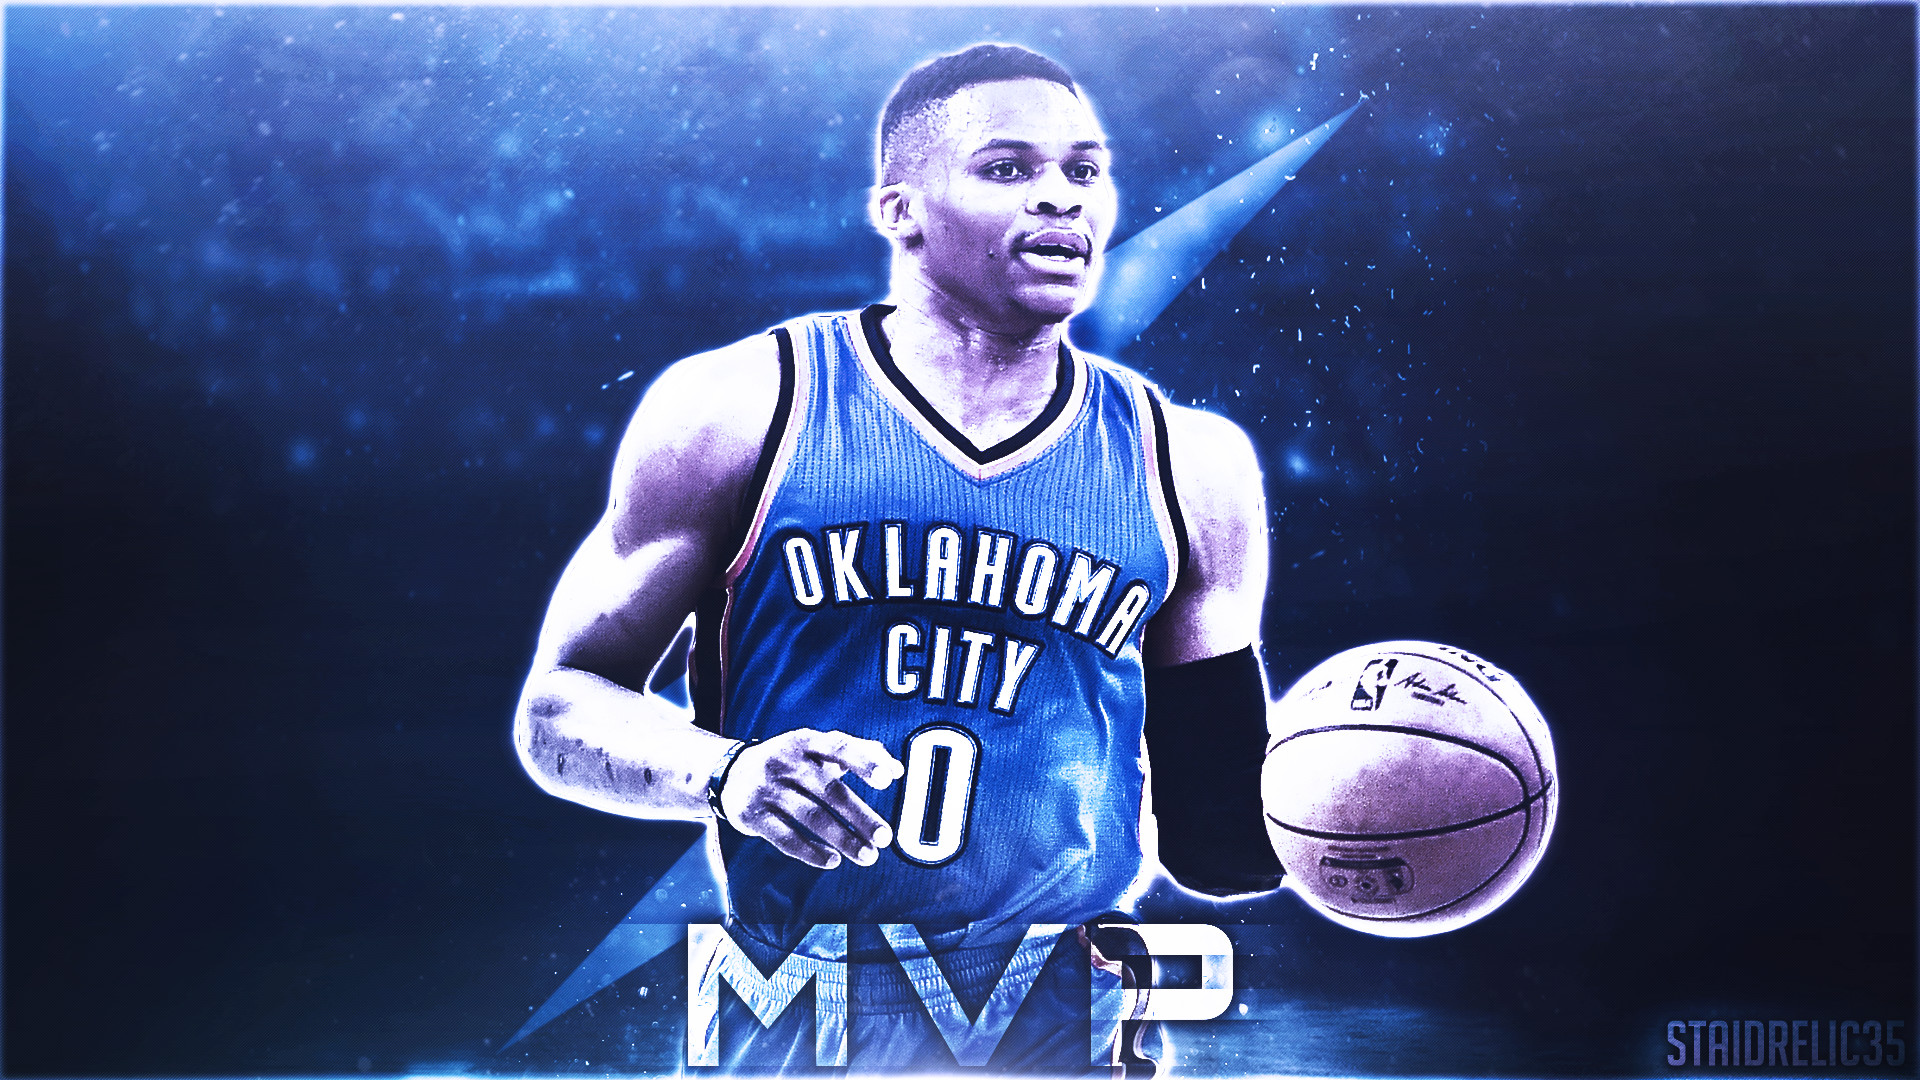 1920x1080 Simple Russell Westbrook "MVP" design I created. What do you guys think?